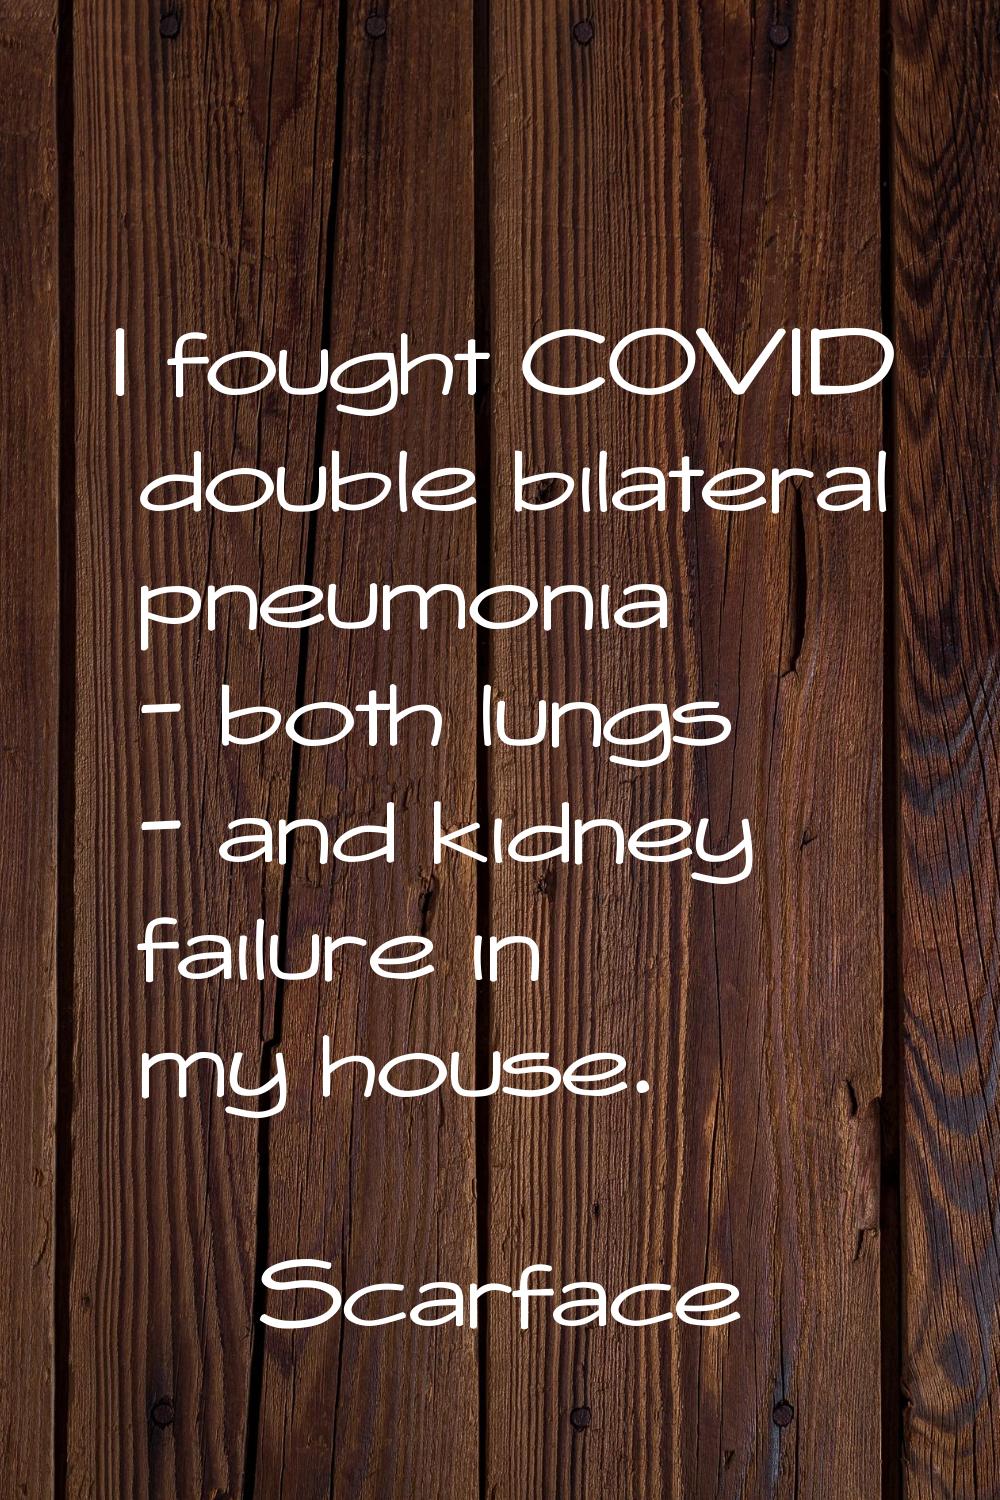 I fought COVID double bilateral pneumonia - both lungs - and kidney failure in my house.